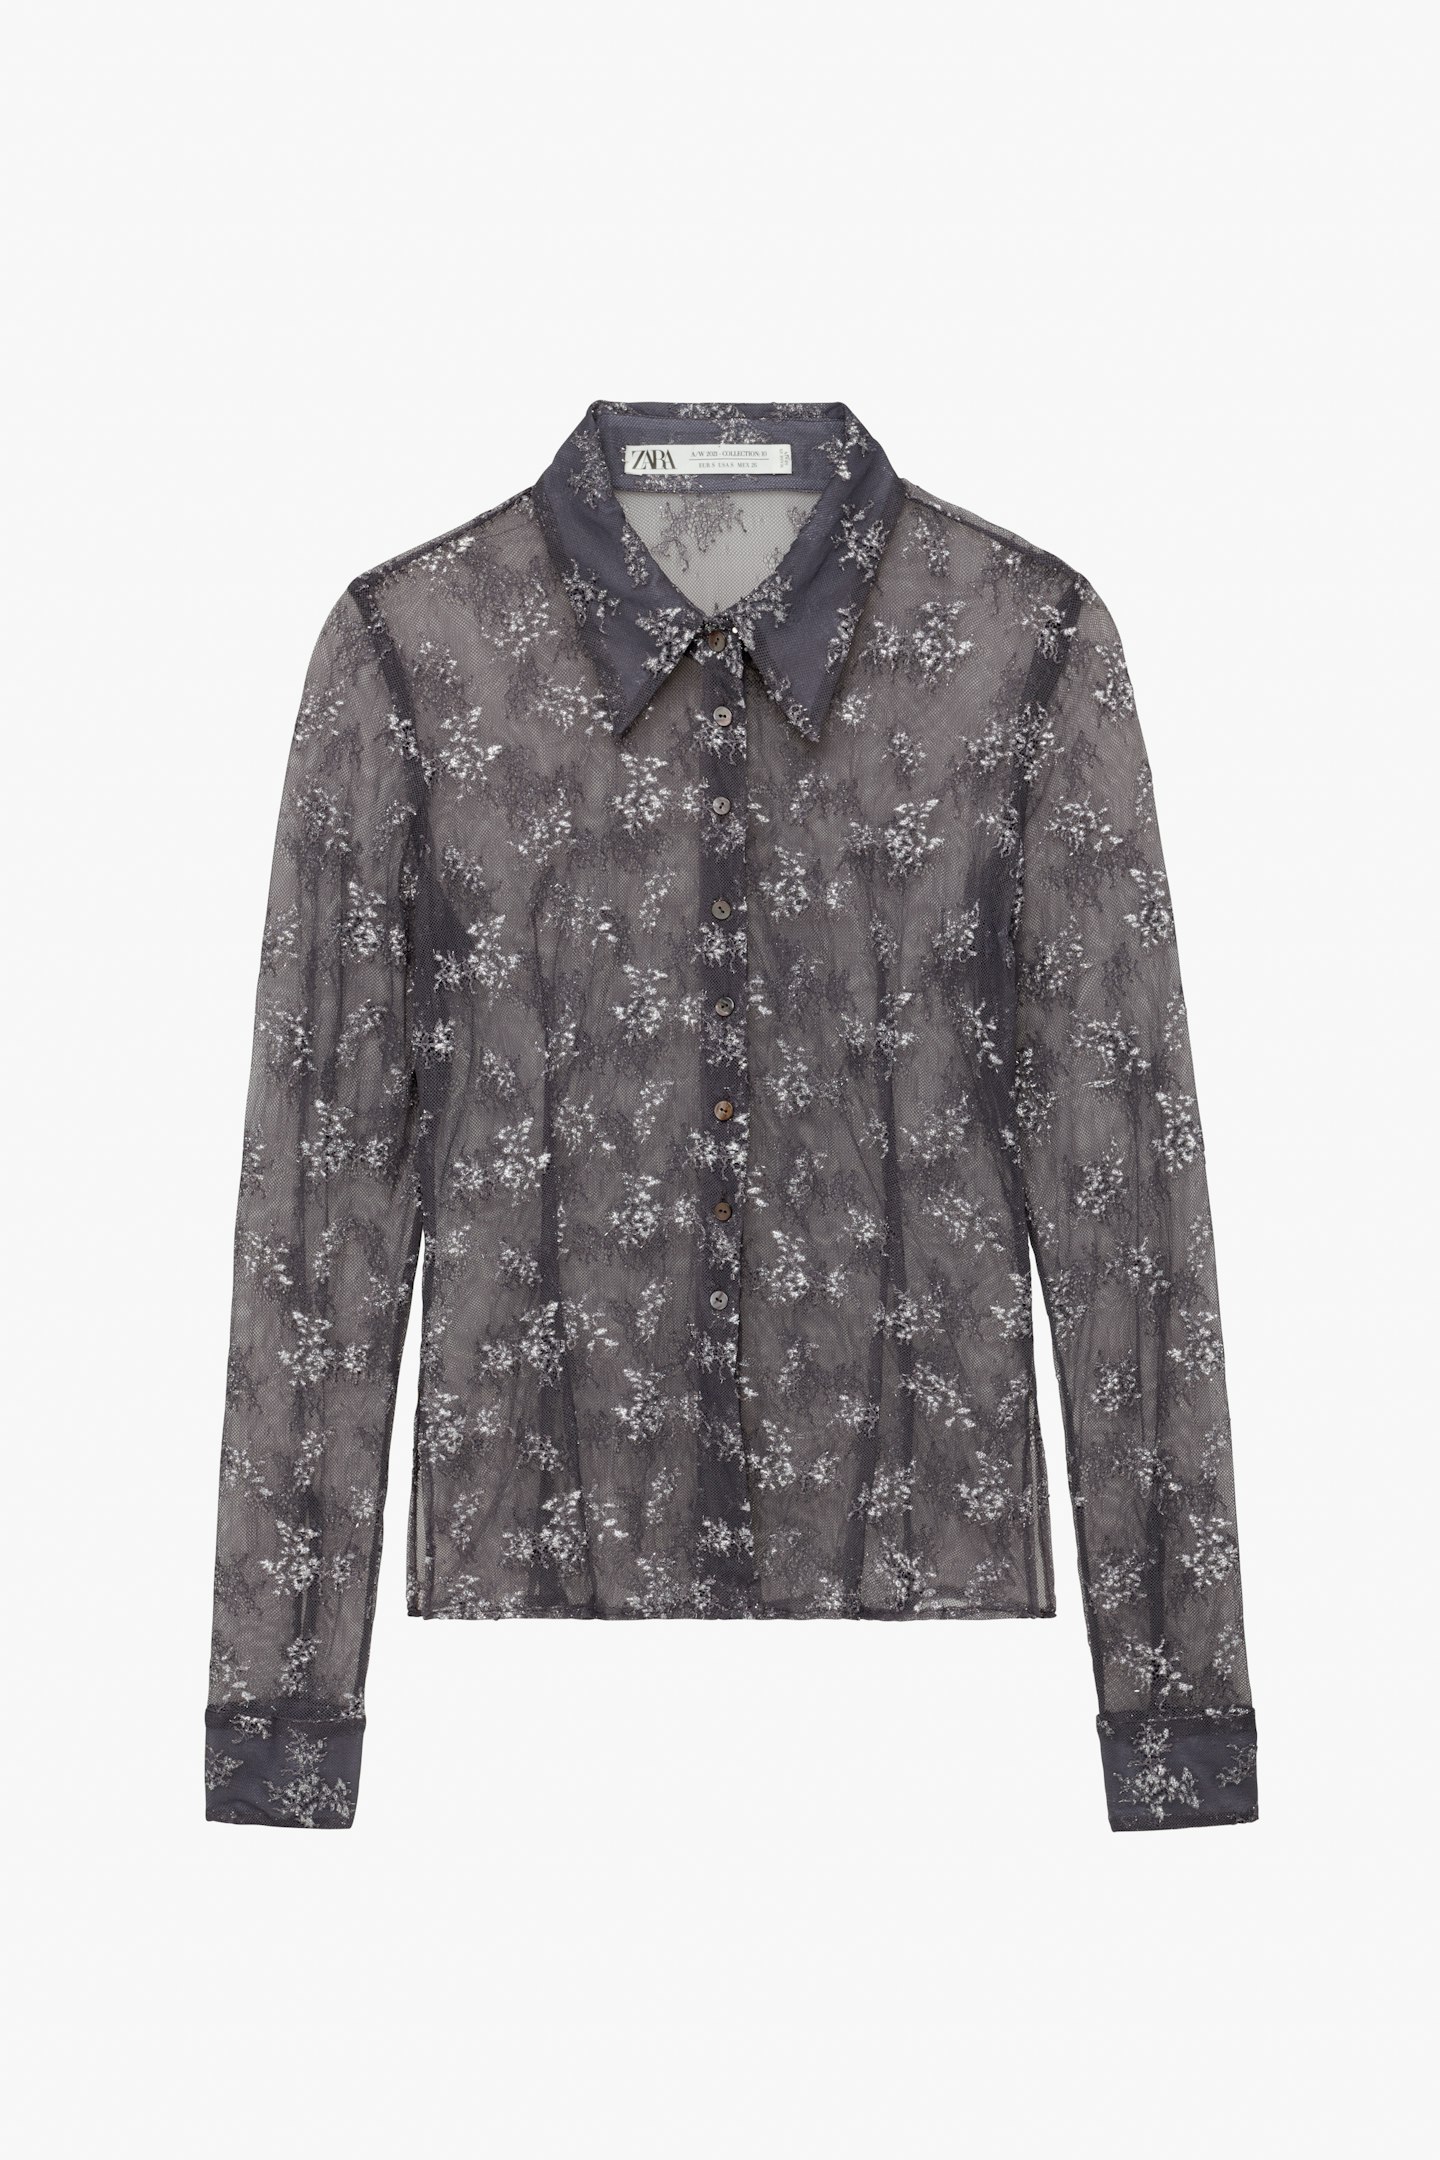 Limited Edition Lace Shirt, £59.99